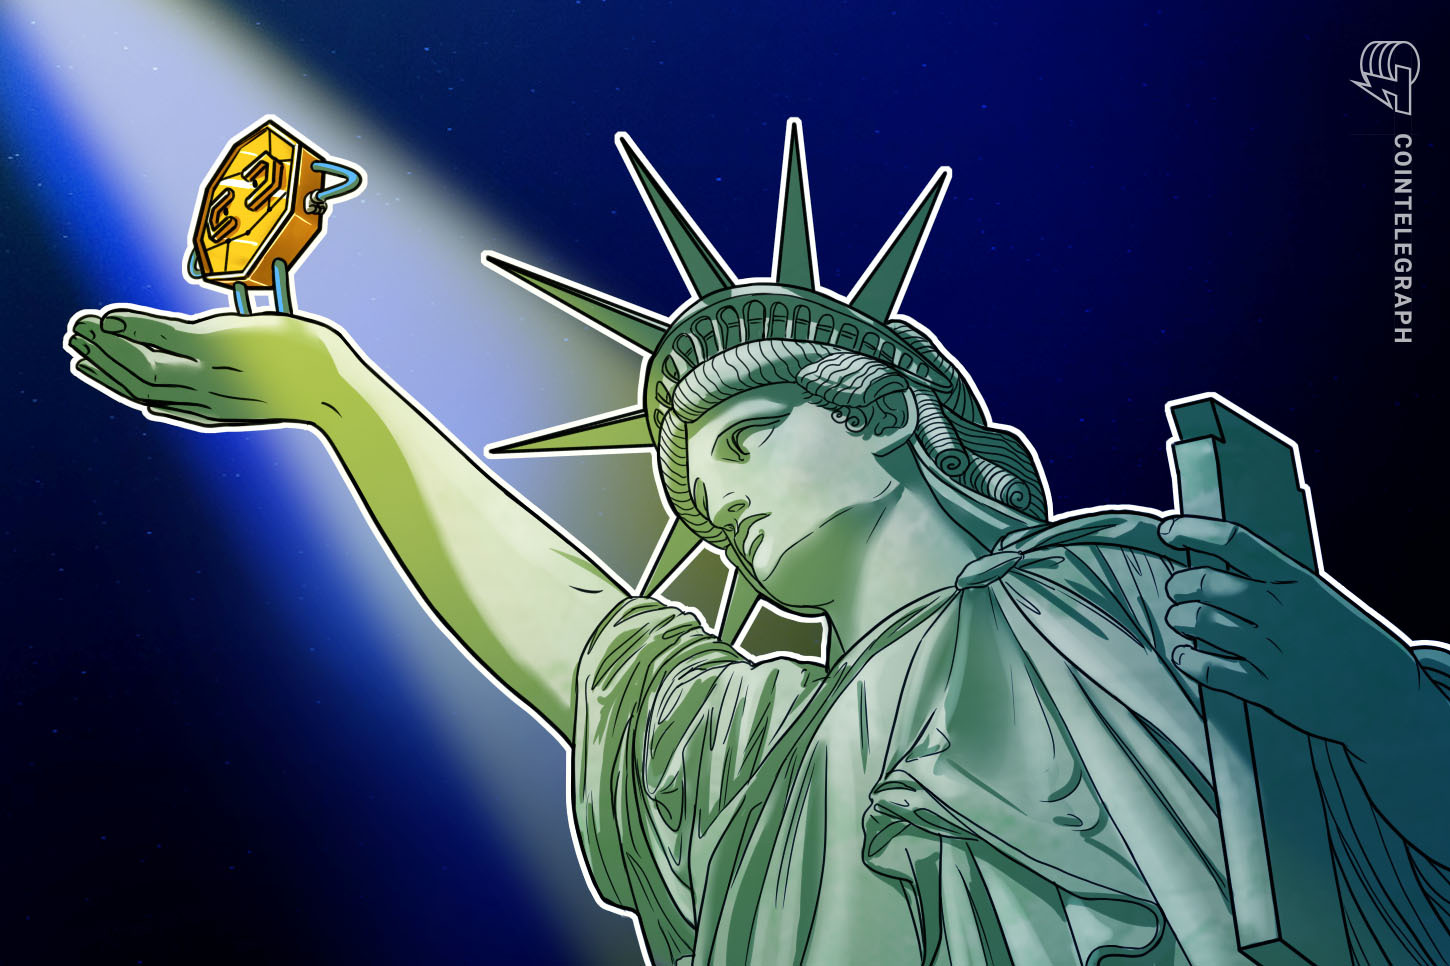 US banking regulator authorizes federal banks to carry reserves for stablecoins